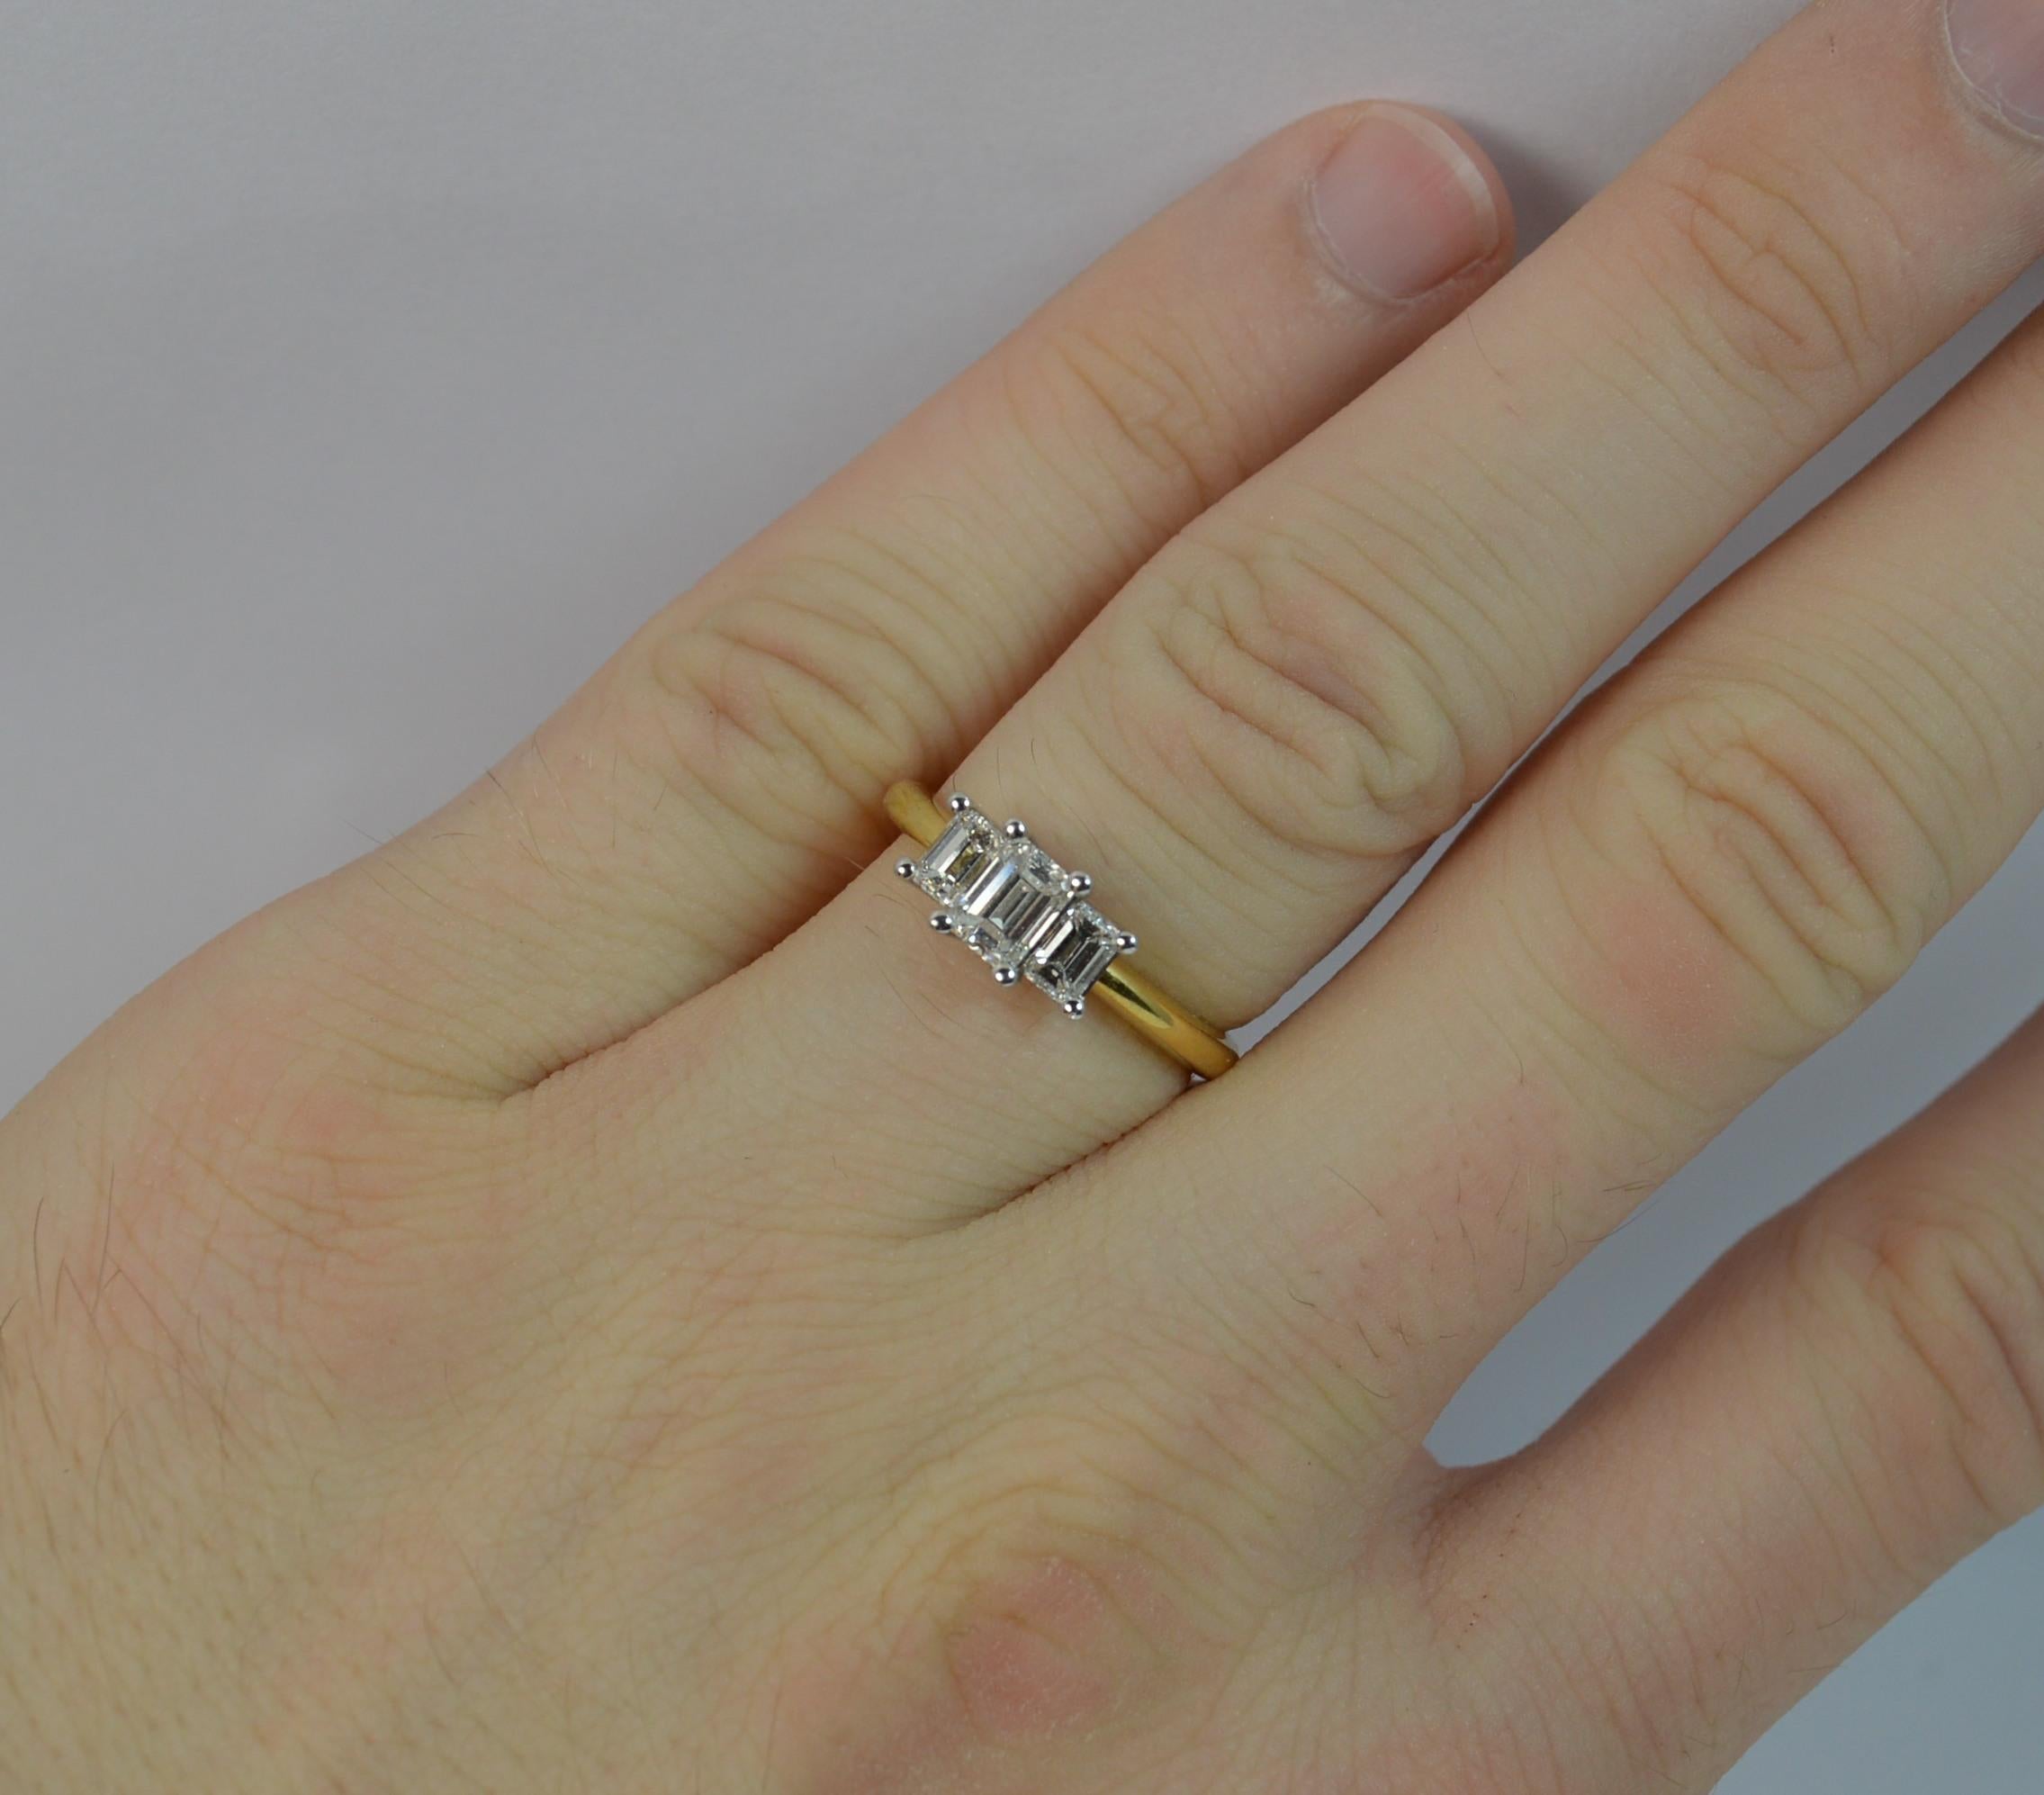 
An 18ct Gold and Diamond three stone ring.

Designed with three natural emerald cut diamonds to total 0.91 carats. The diamonds are of VS clarity and E-F colour, very clean, white and sparkly. All mounted in 18ct white gold claws.

Set onto a solid